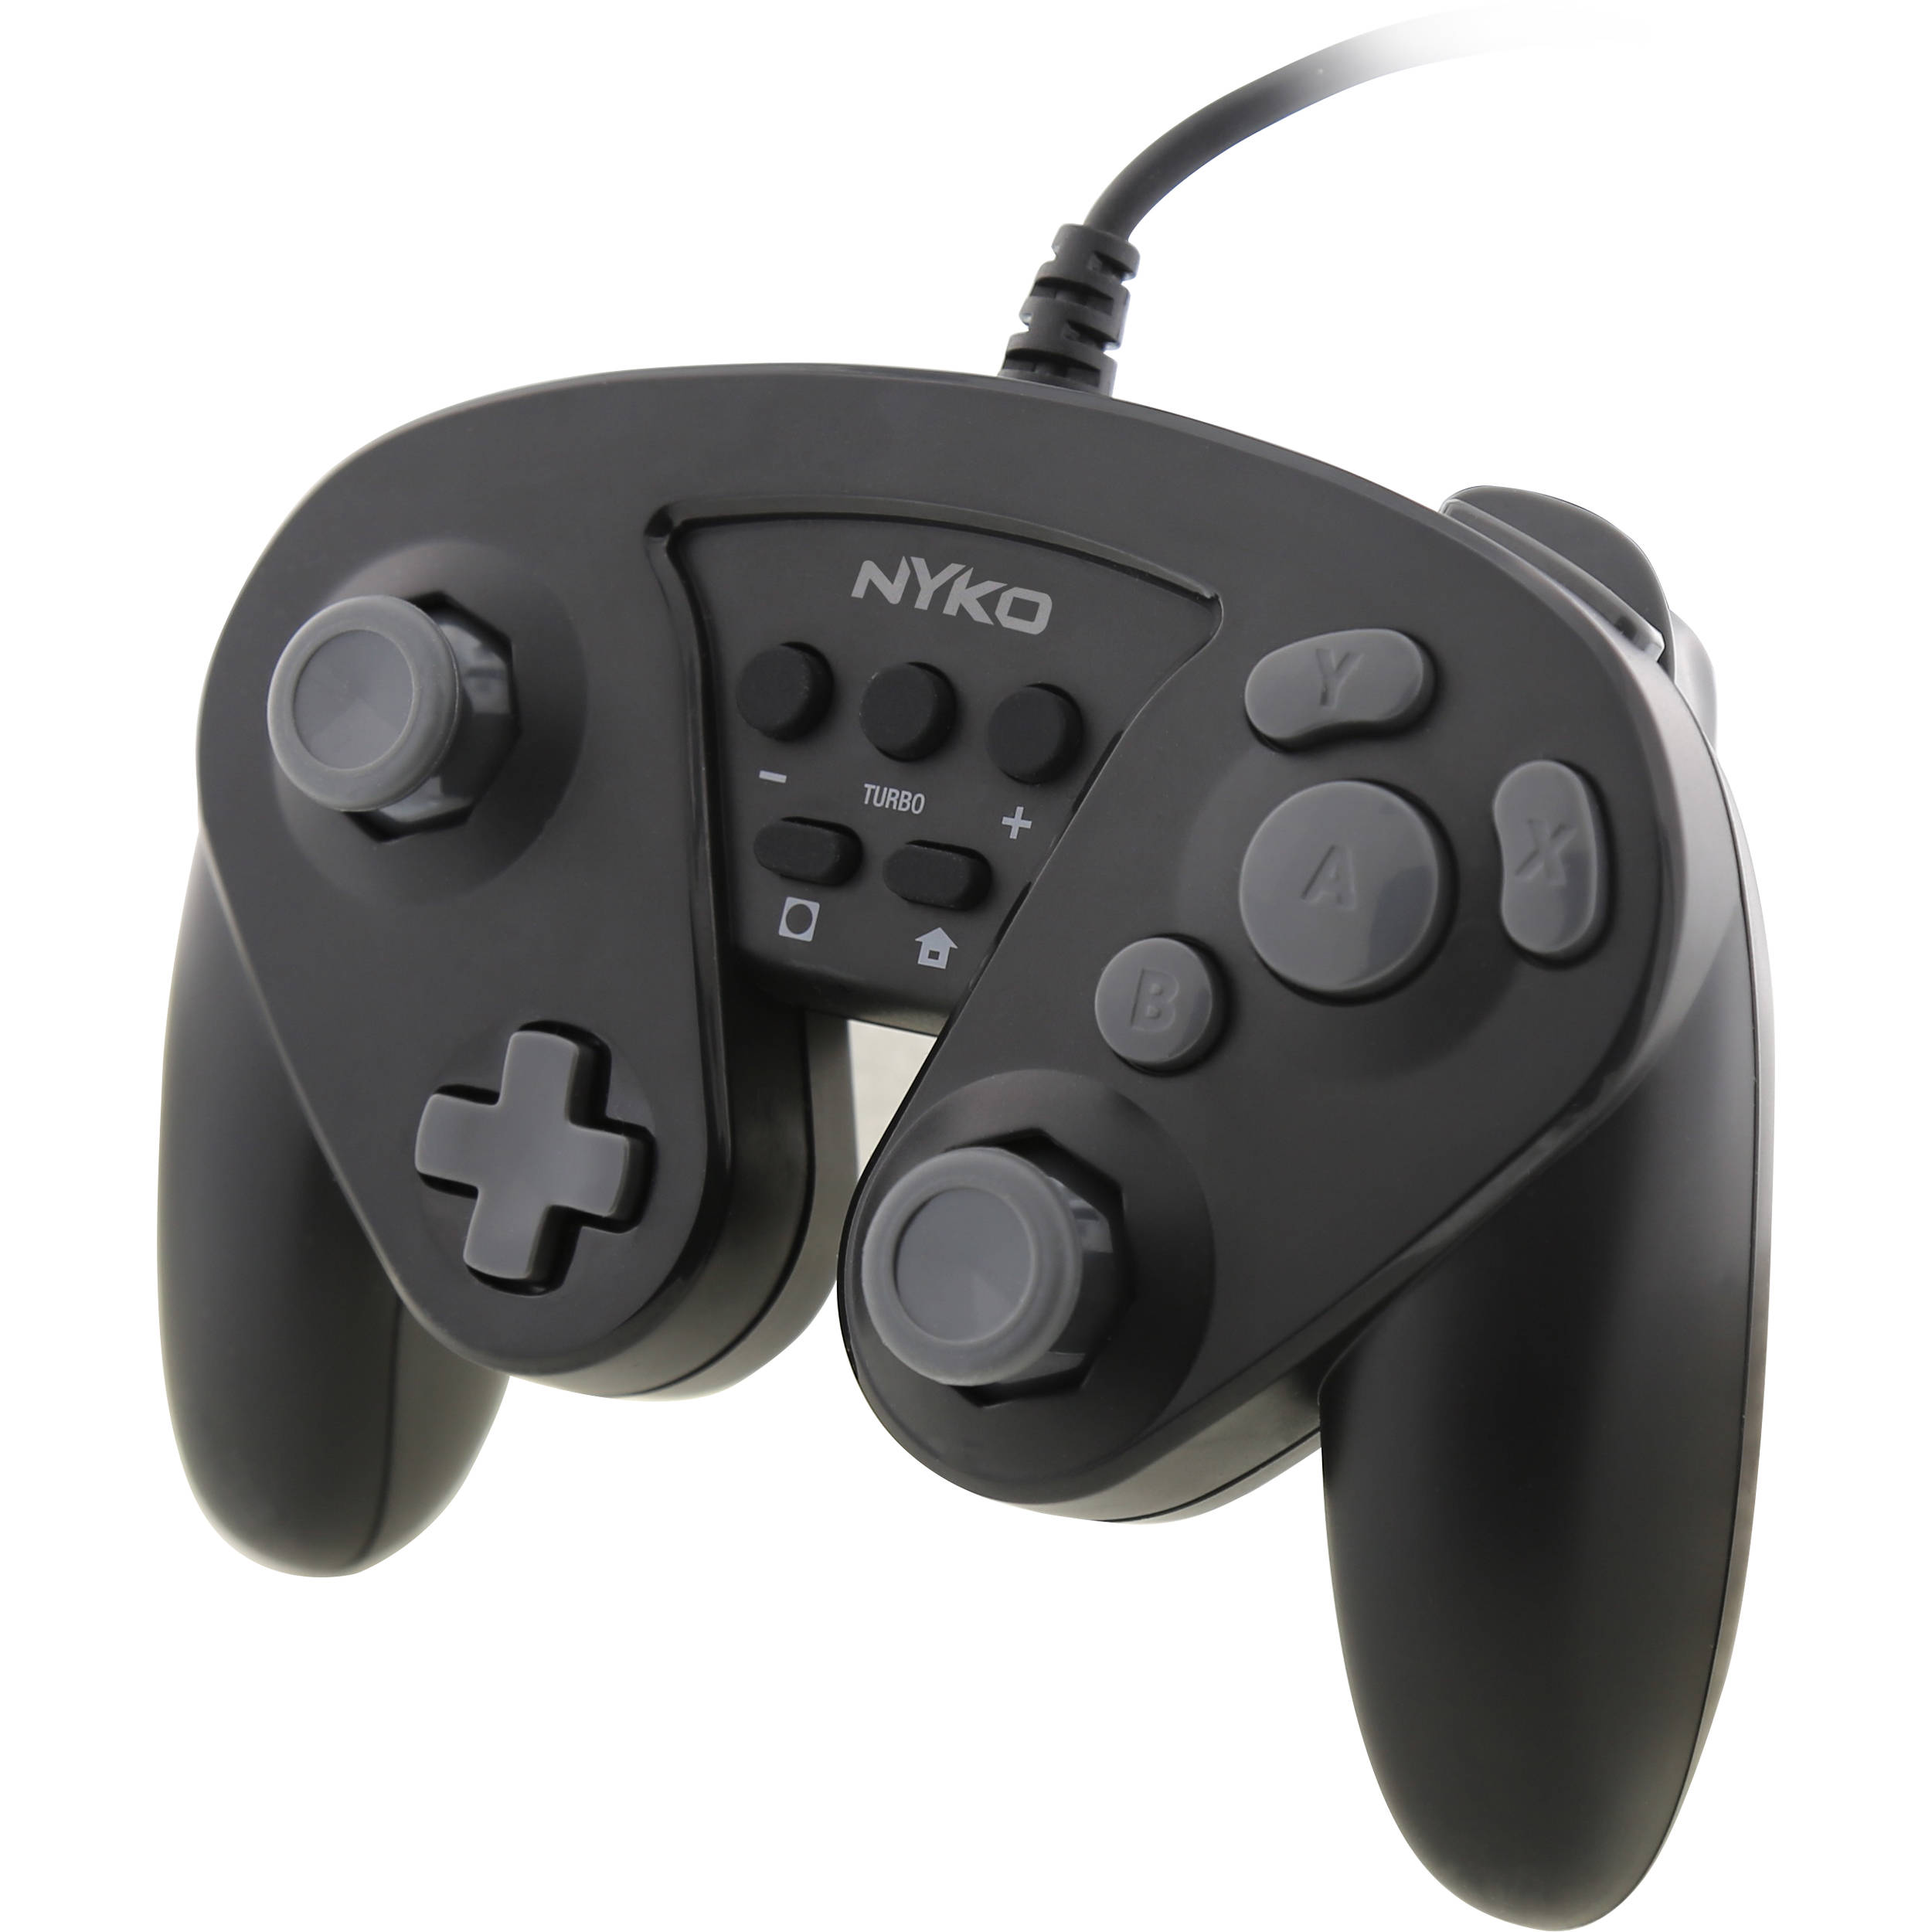 3rd party gamecube controller